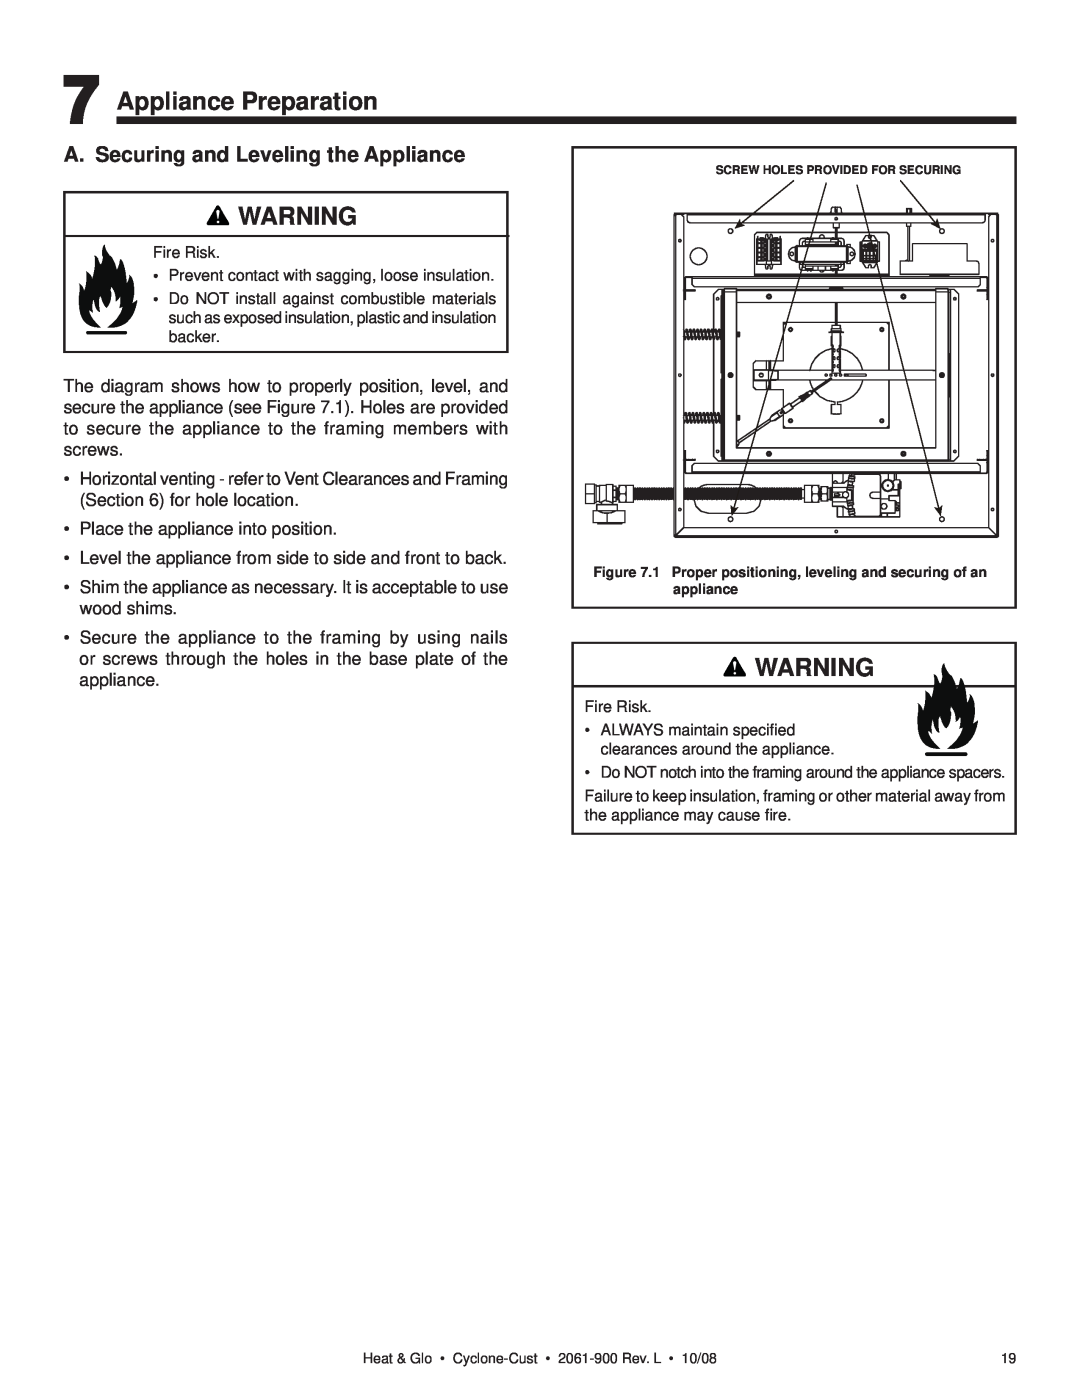 Hearth and Home Technologies Cyclone-Cust owner manual Appliance Preparation, A. Securing and Leveling the Appliance 